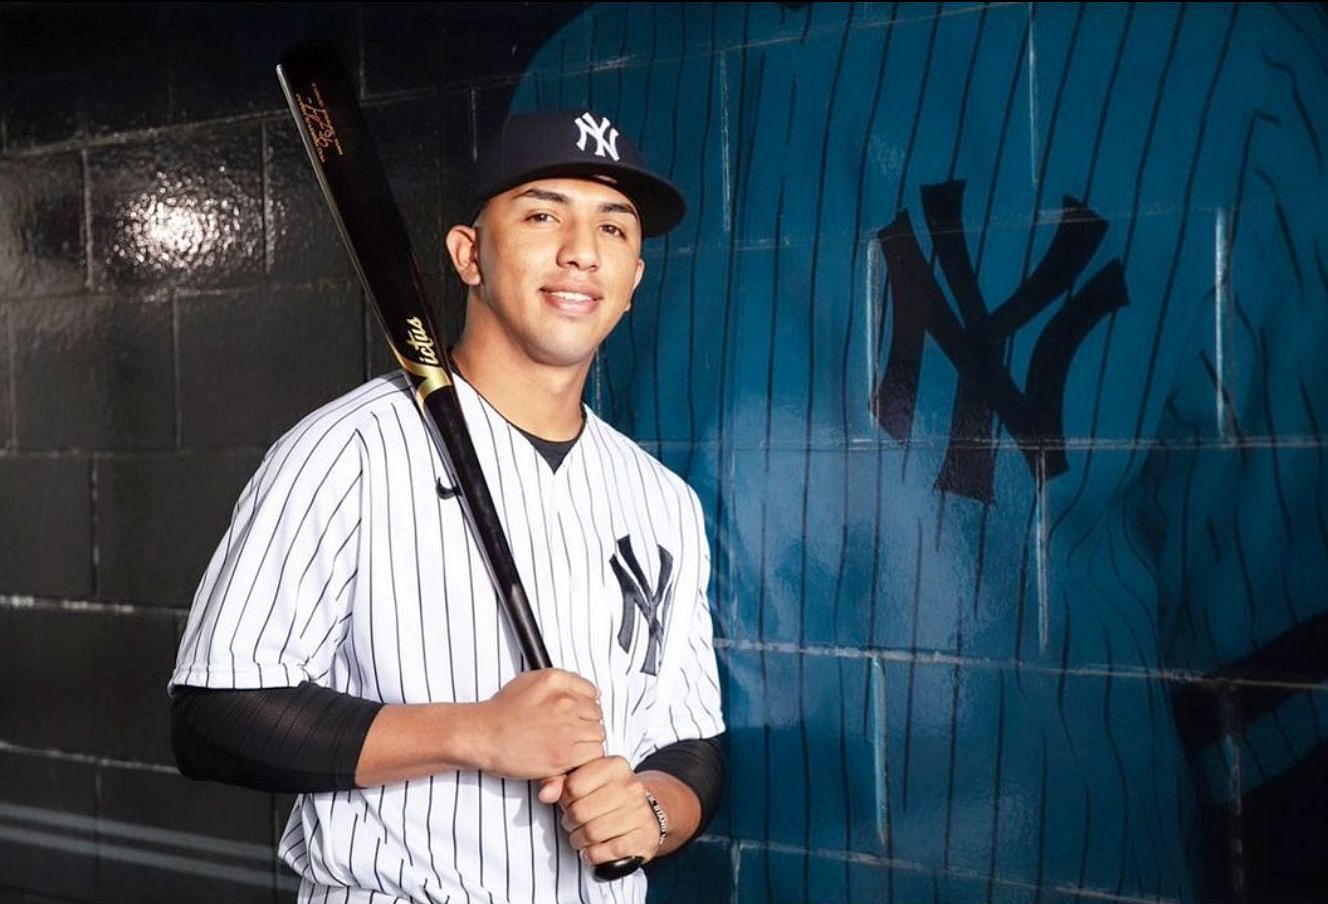 Oswald Peraza a top prospect at shortstop for the New York Yankees (Photo source: @oswaldperaza27 Instagram account)